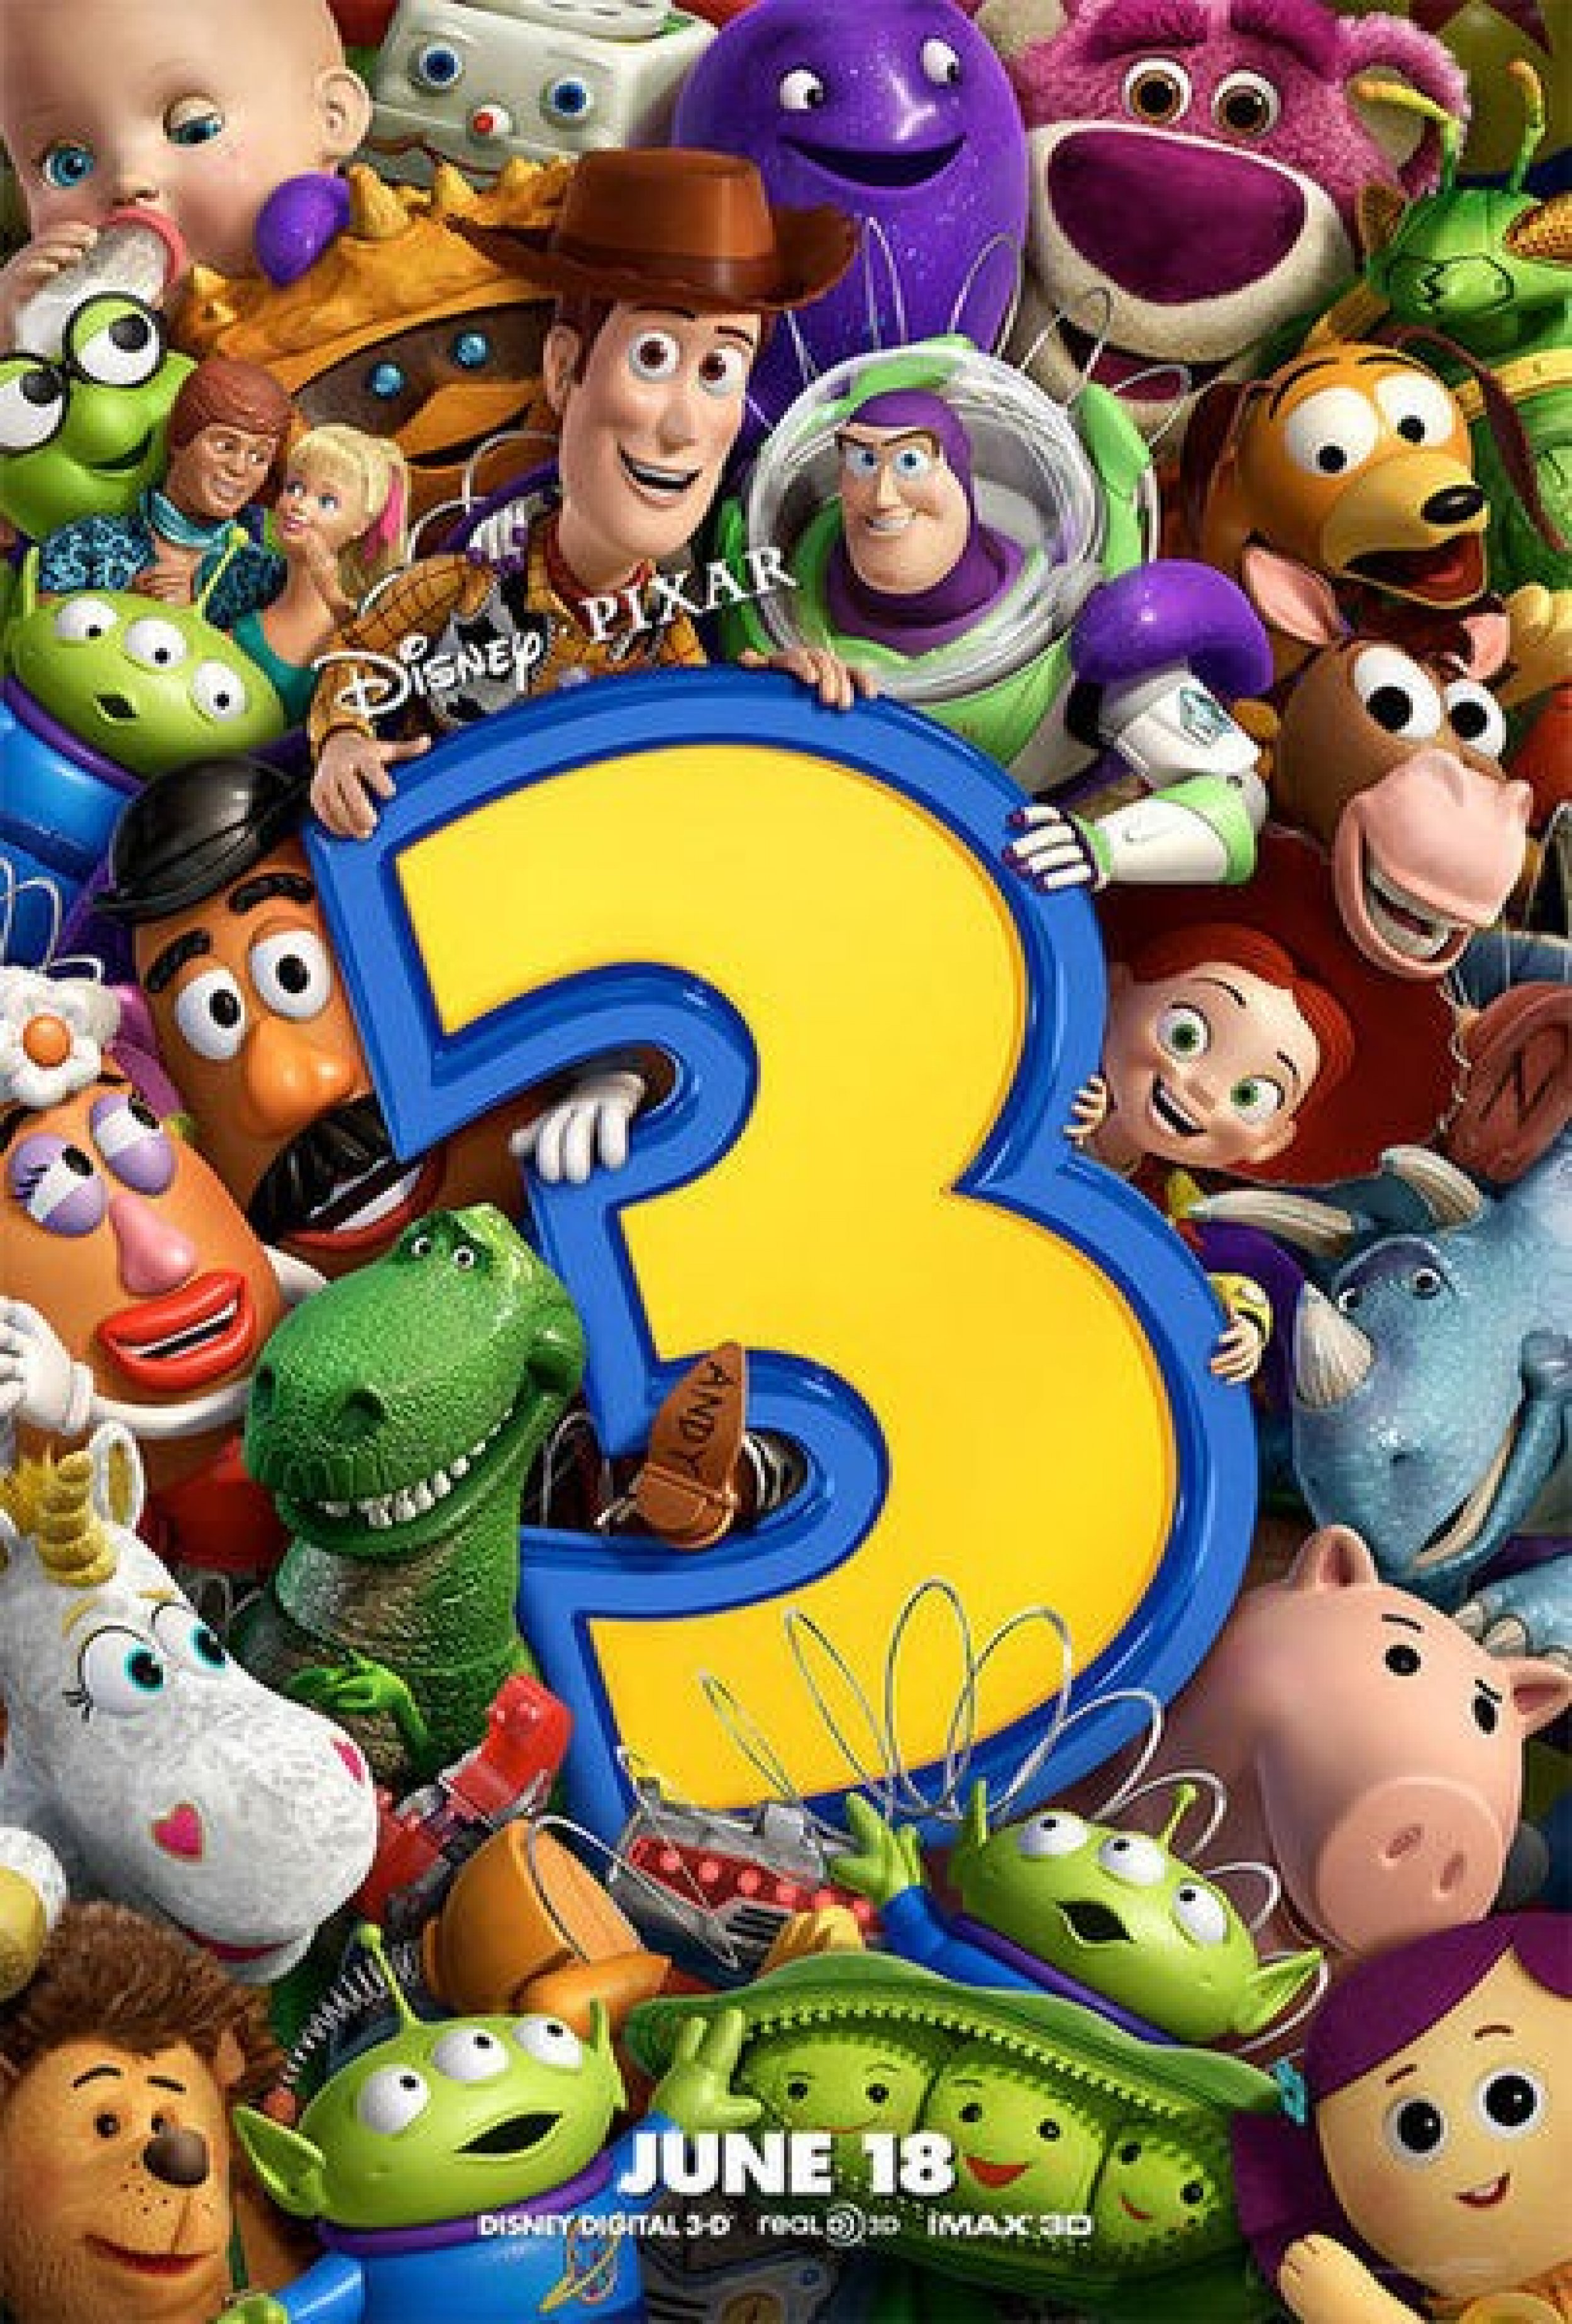 1. Toy Story 3